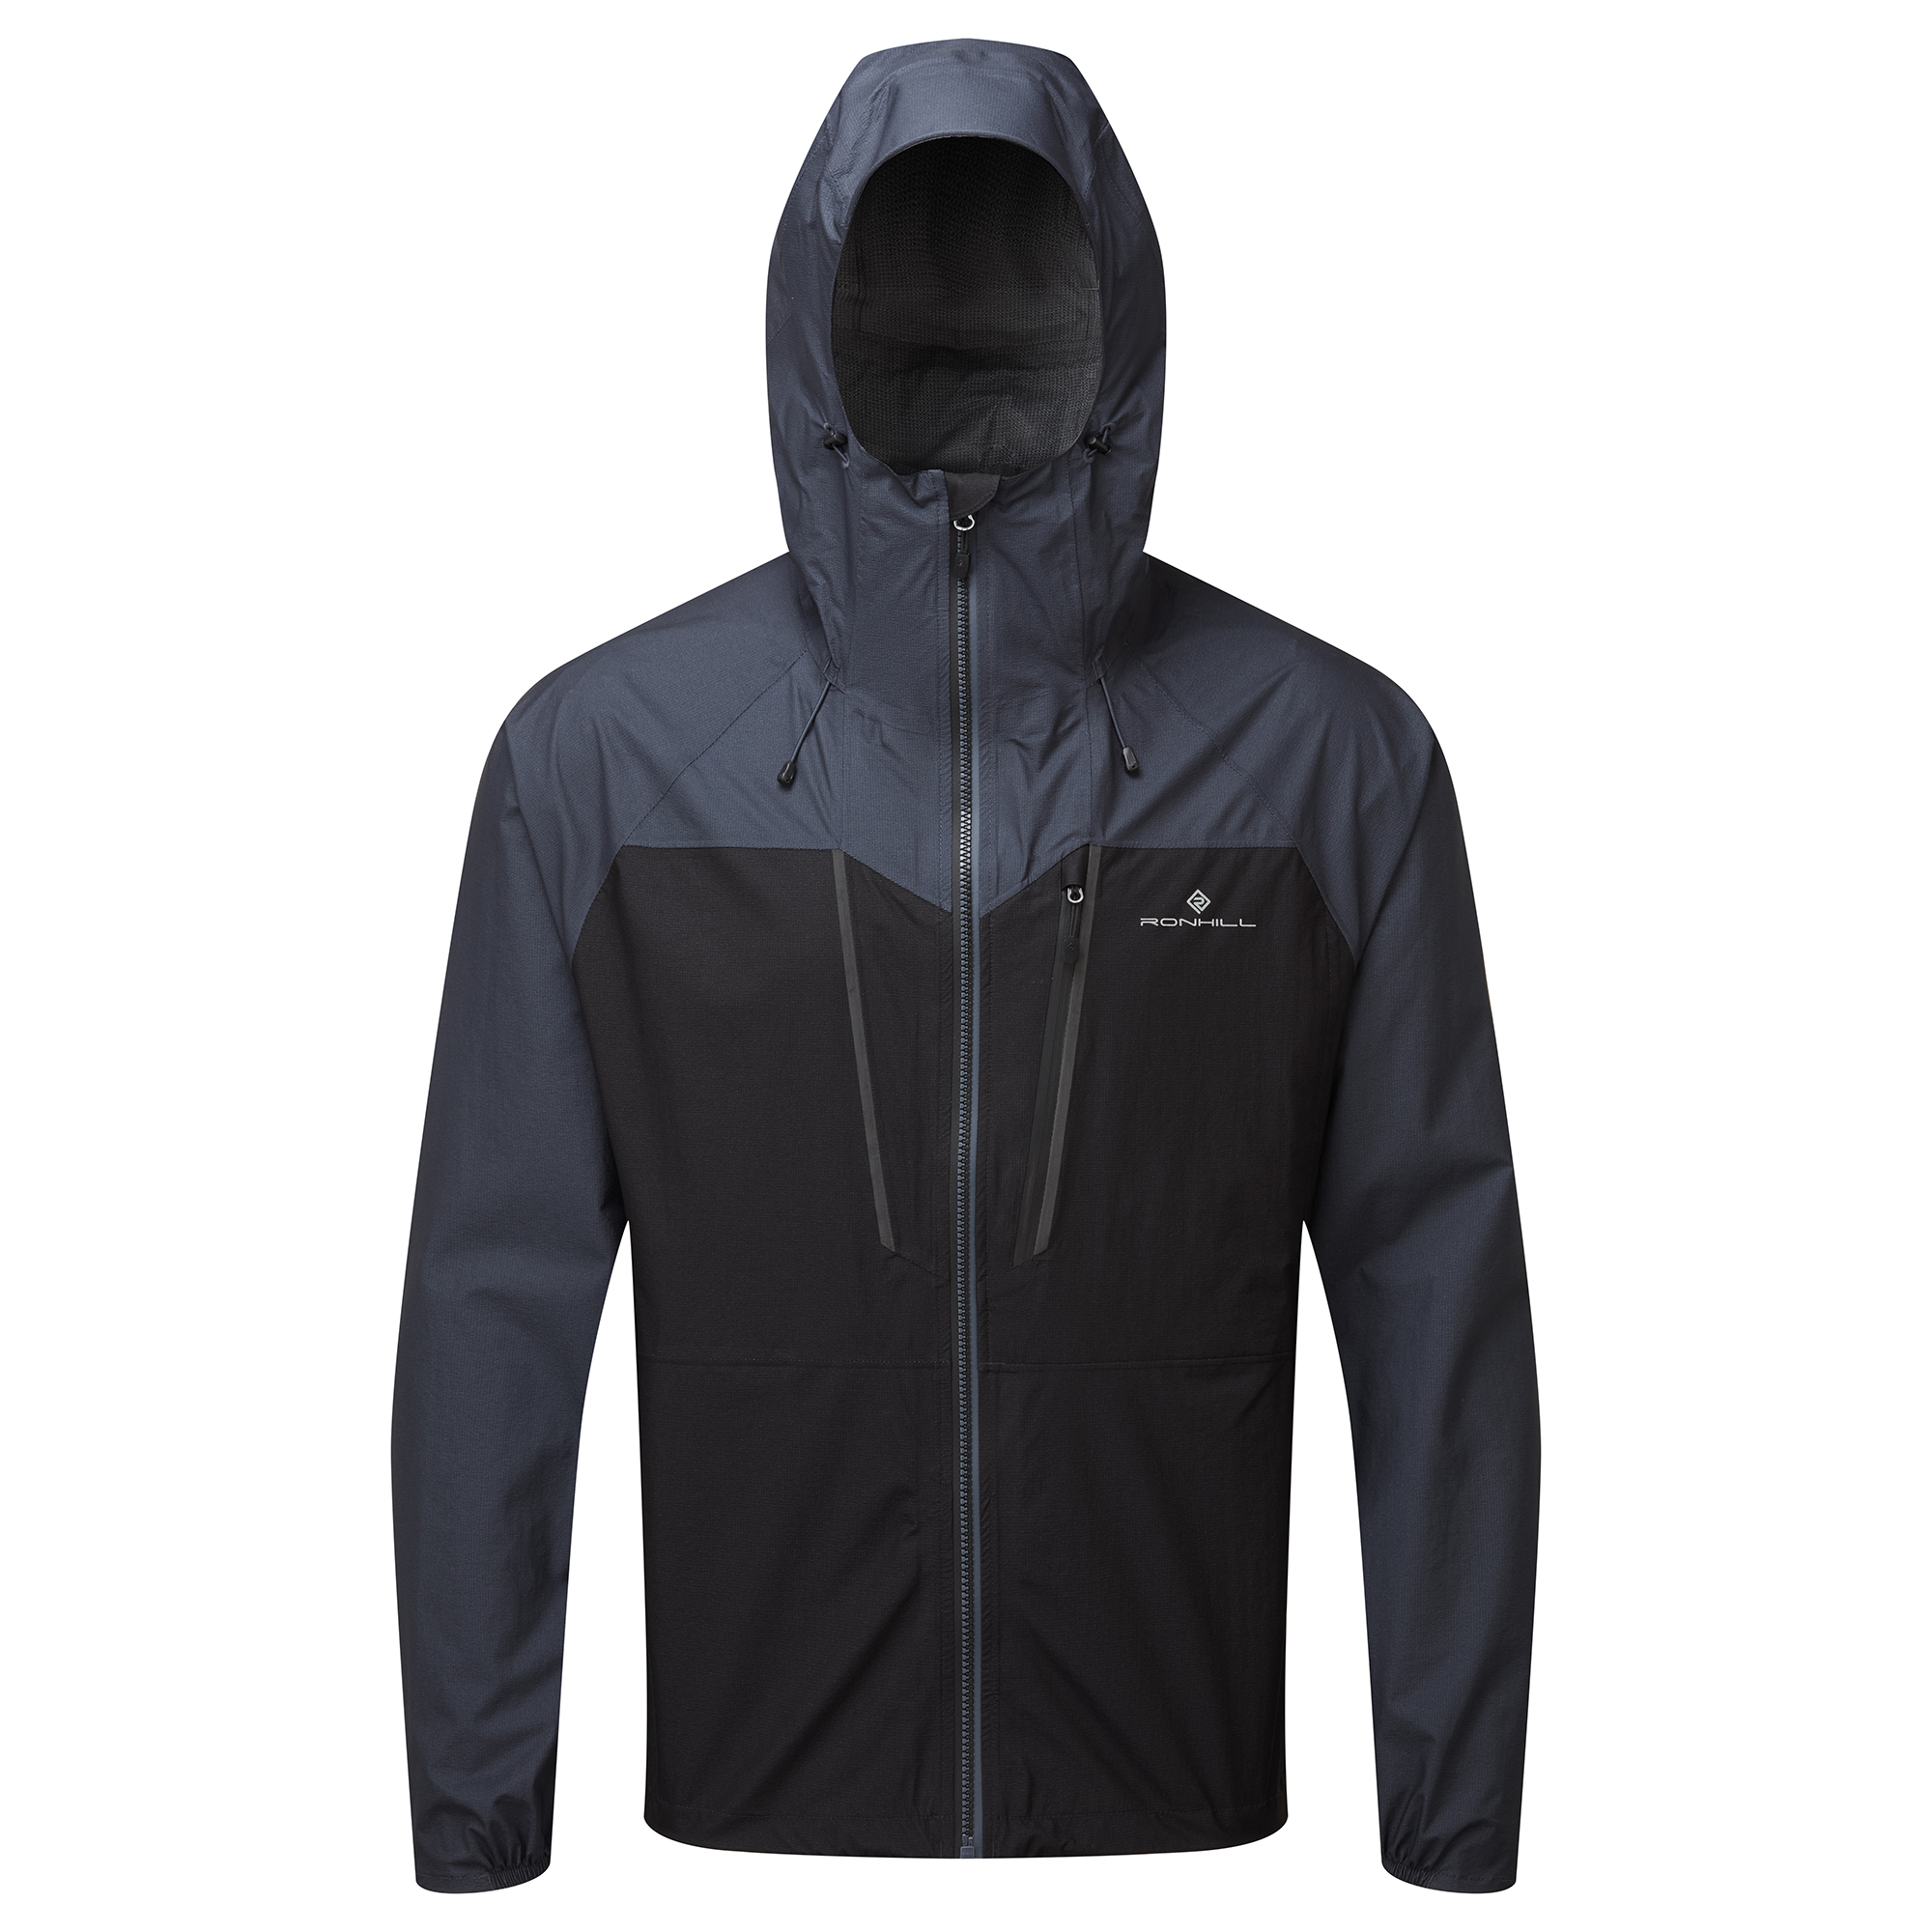 Mens_Tech_Fortify_Jacket_Black_Charcoal_Front.jpg